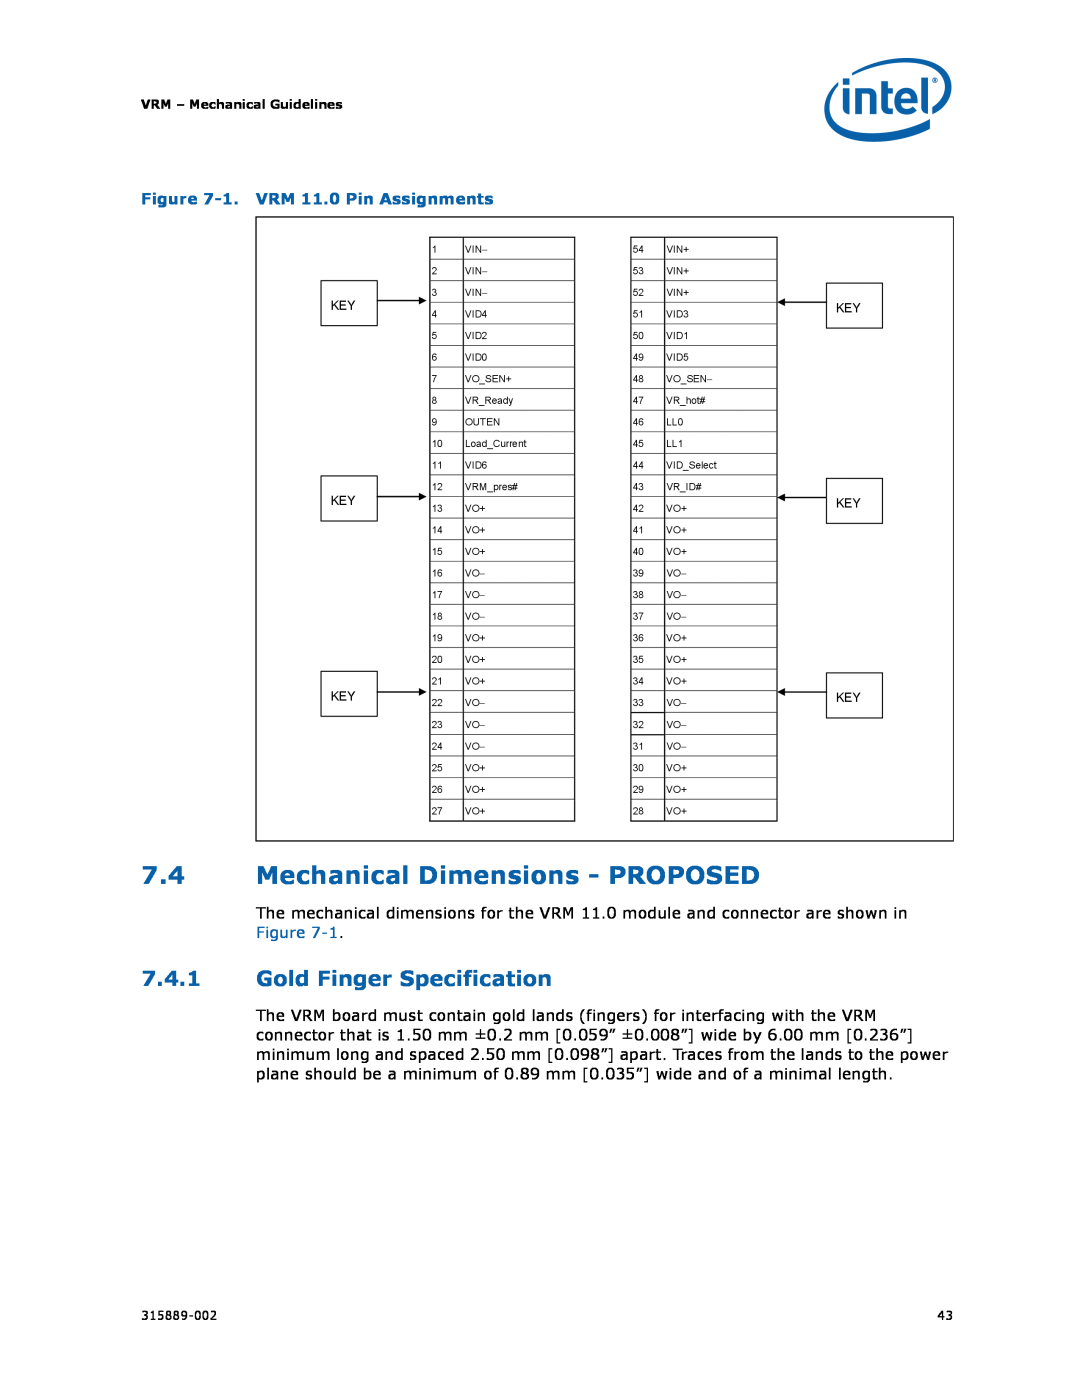 Intel 315889-002 manual 7.4Mechanical Dimensions - PROPOSED, 7.4.1Gold Finger Specification 